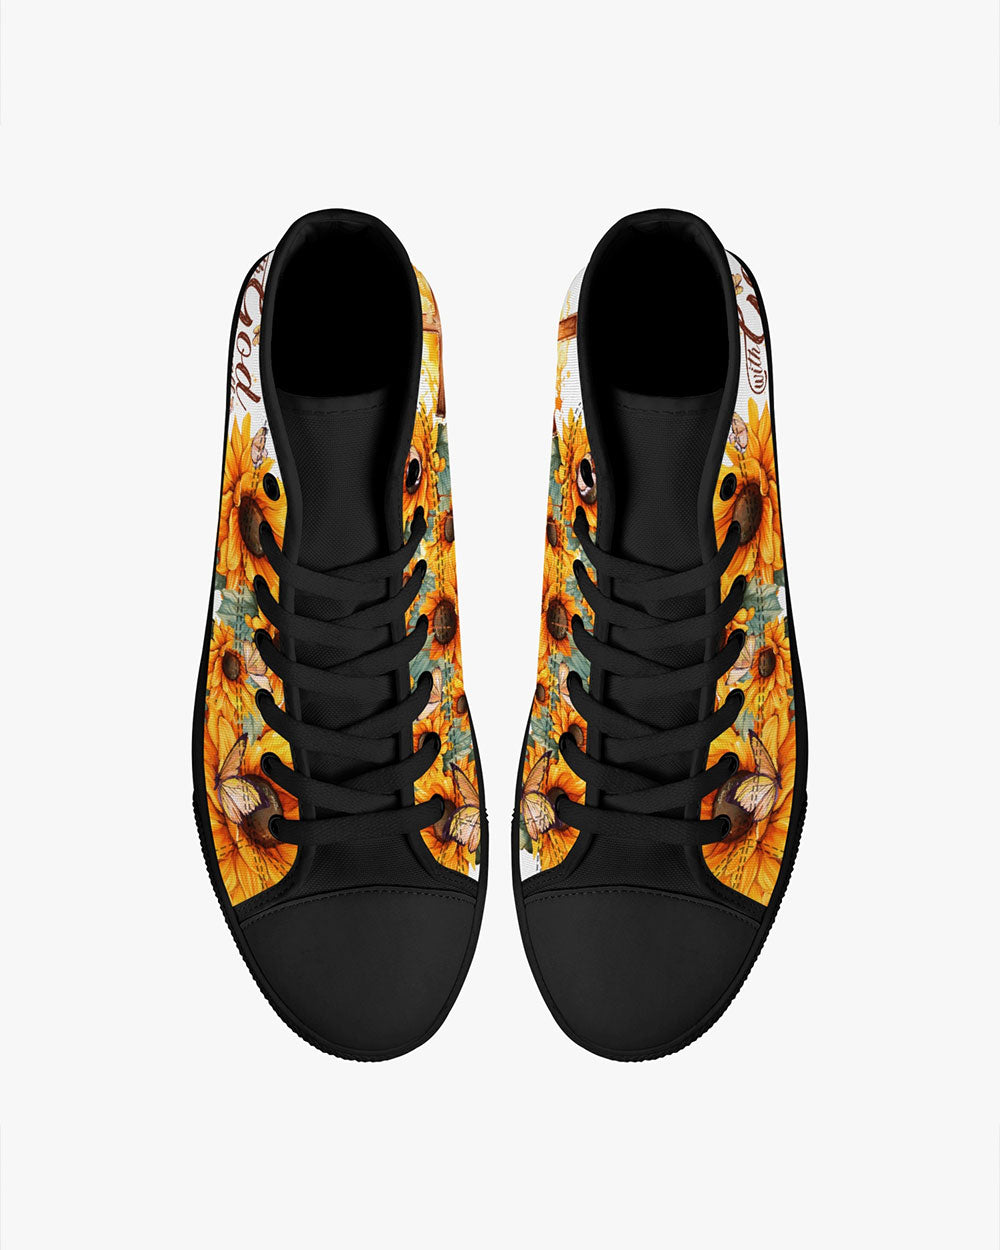 With God All Things Are Possible High Top Canvas Shoes - Tytd2606231